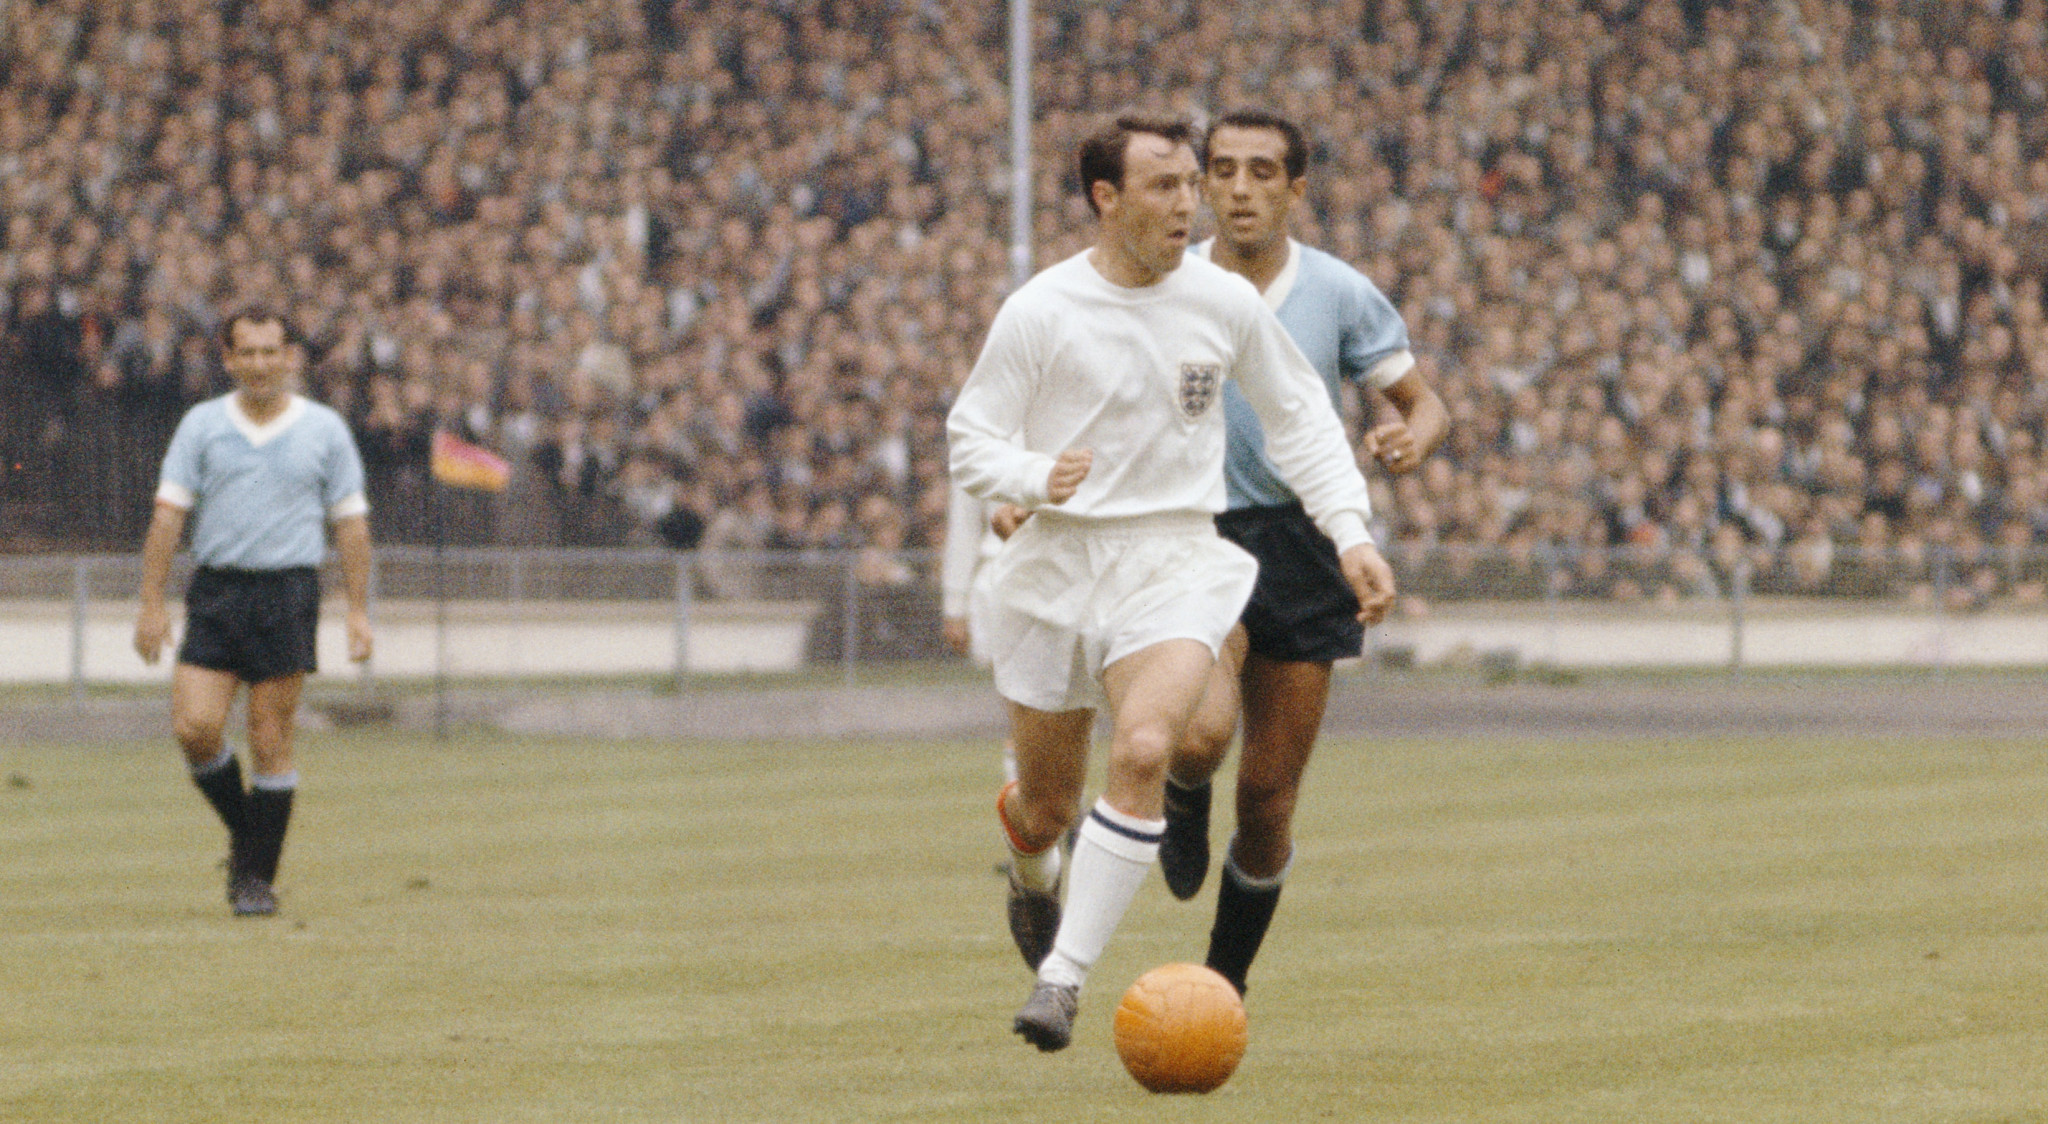 Jimmy Greaves won the FIFA World Cup in 1966 with England ©Getty Images